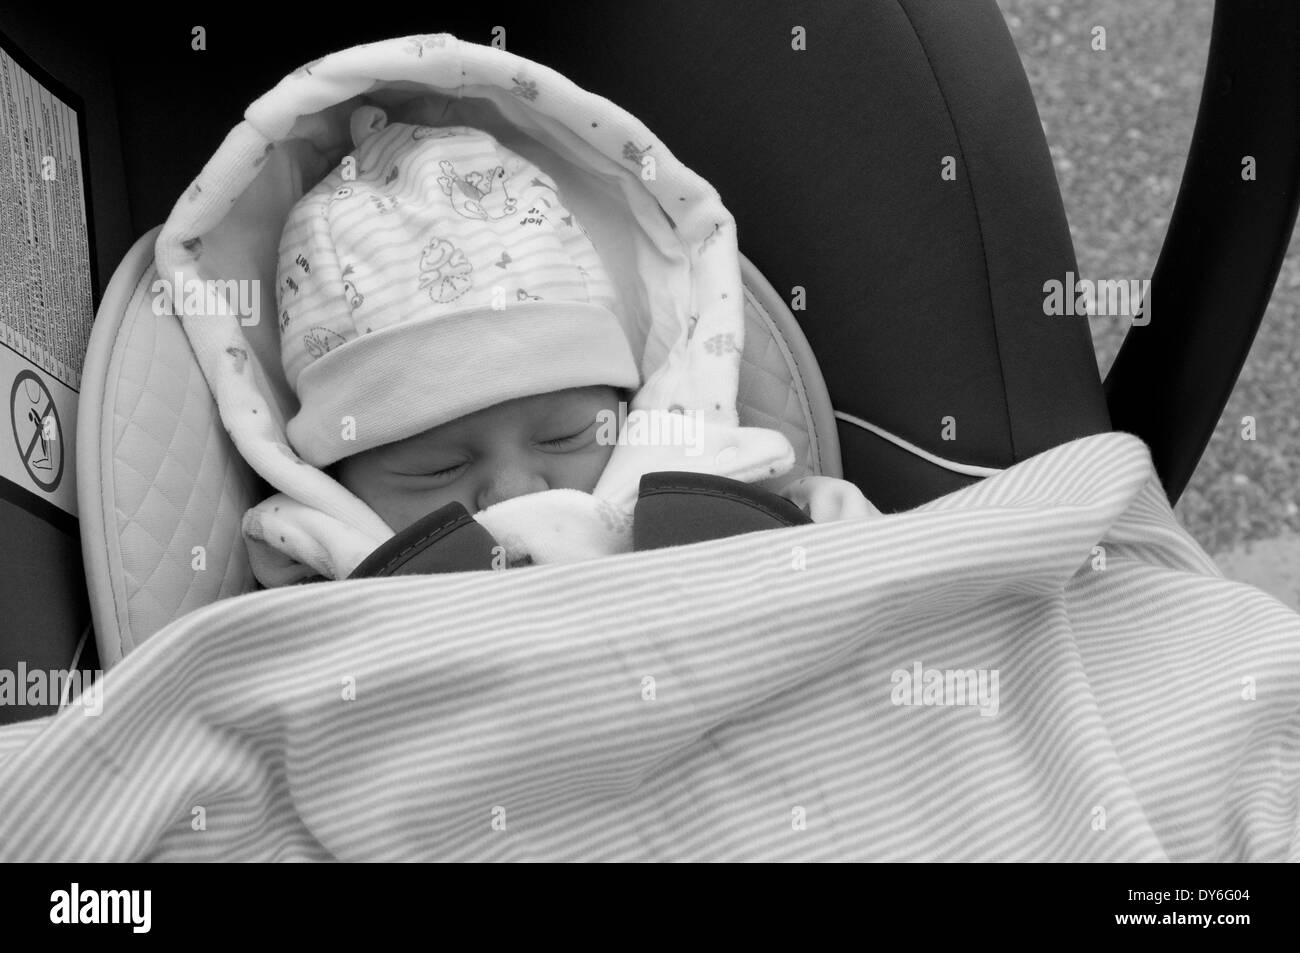 Newborn baby girl, a day old, asleep in car seat, leaving hospital Stock Photo